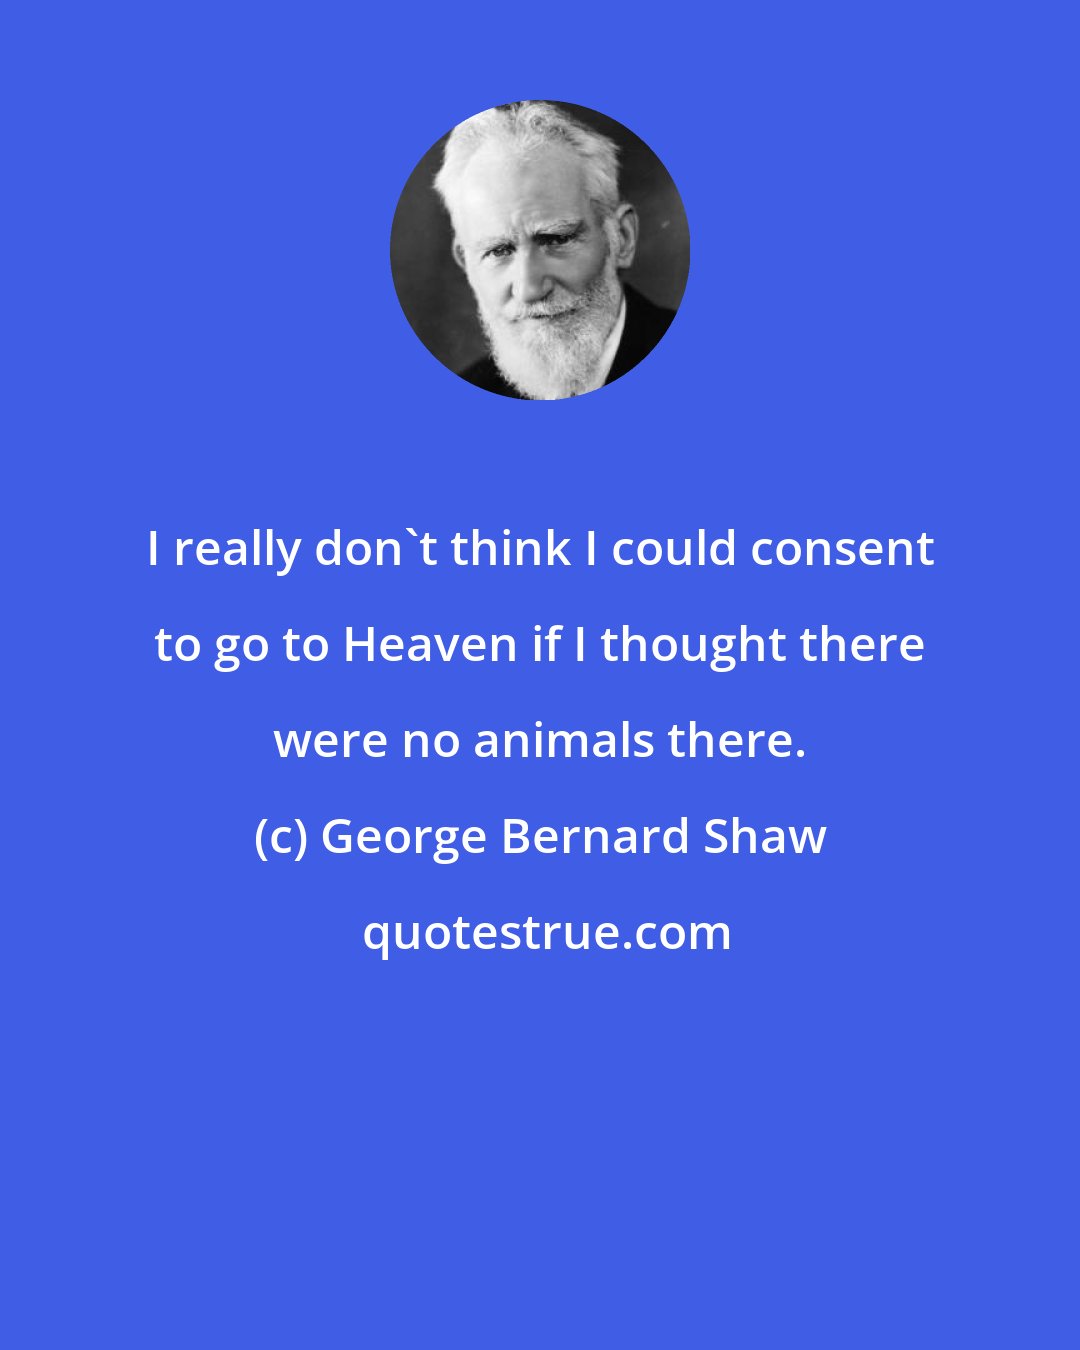 George Bernard Shaw: I really don't think I could consent to go to Heaven if I thought there were no animals there.